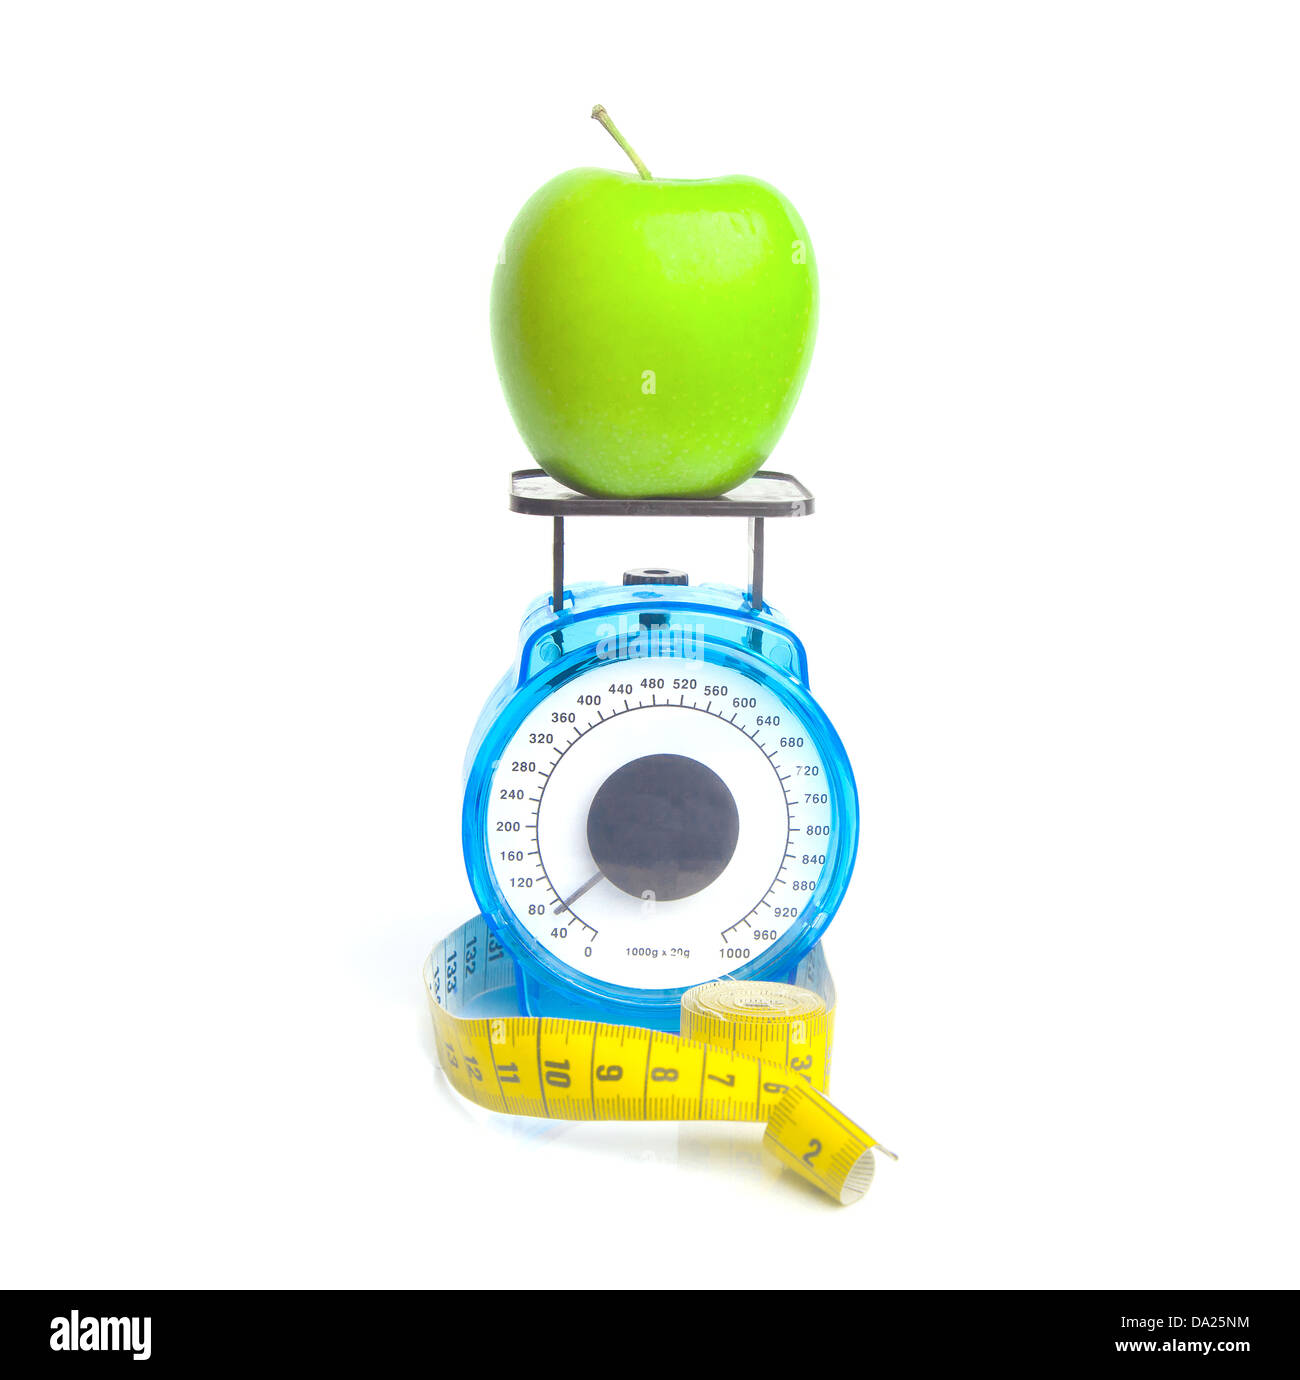 Weighing a green apple: weight loss concept Stock Photo